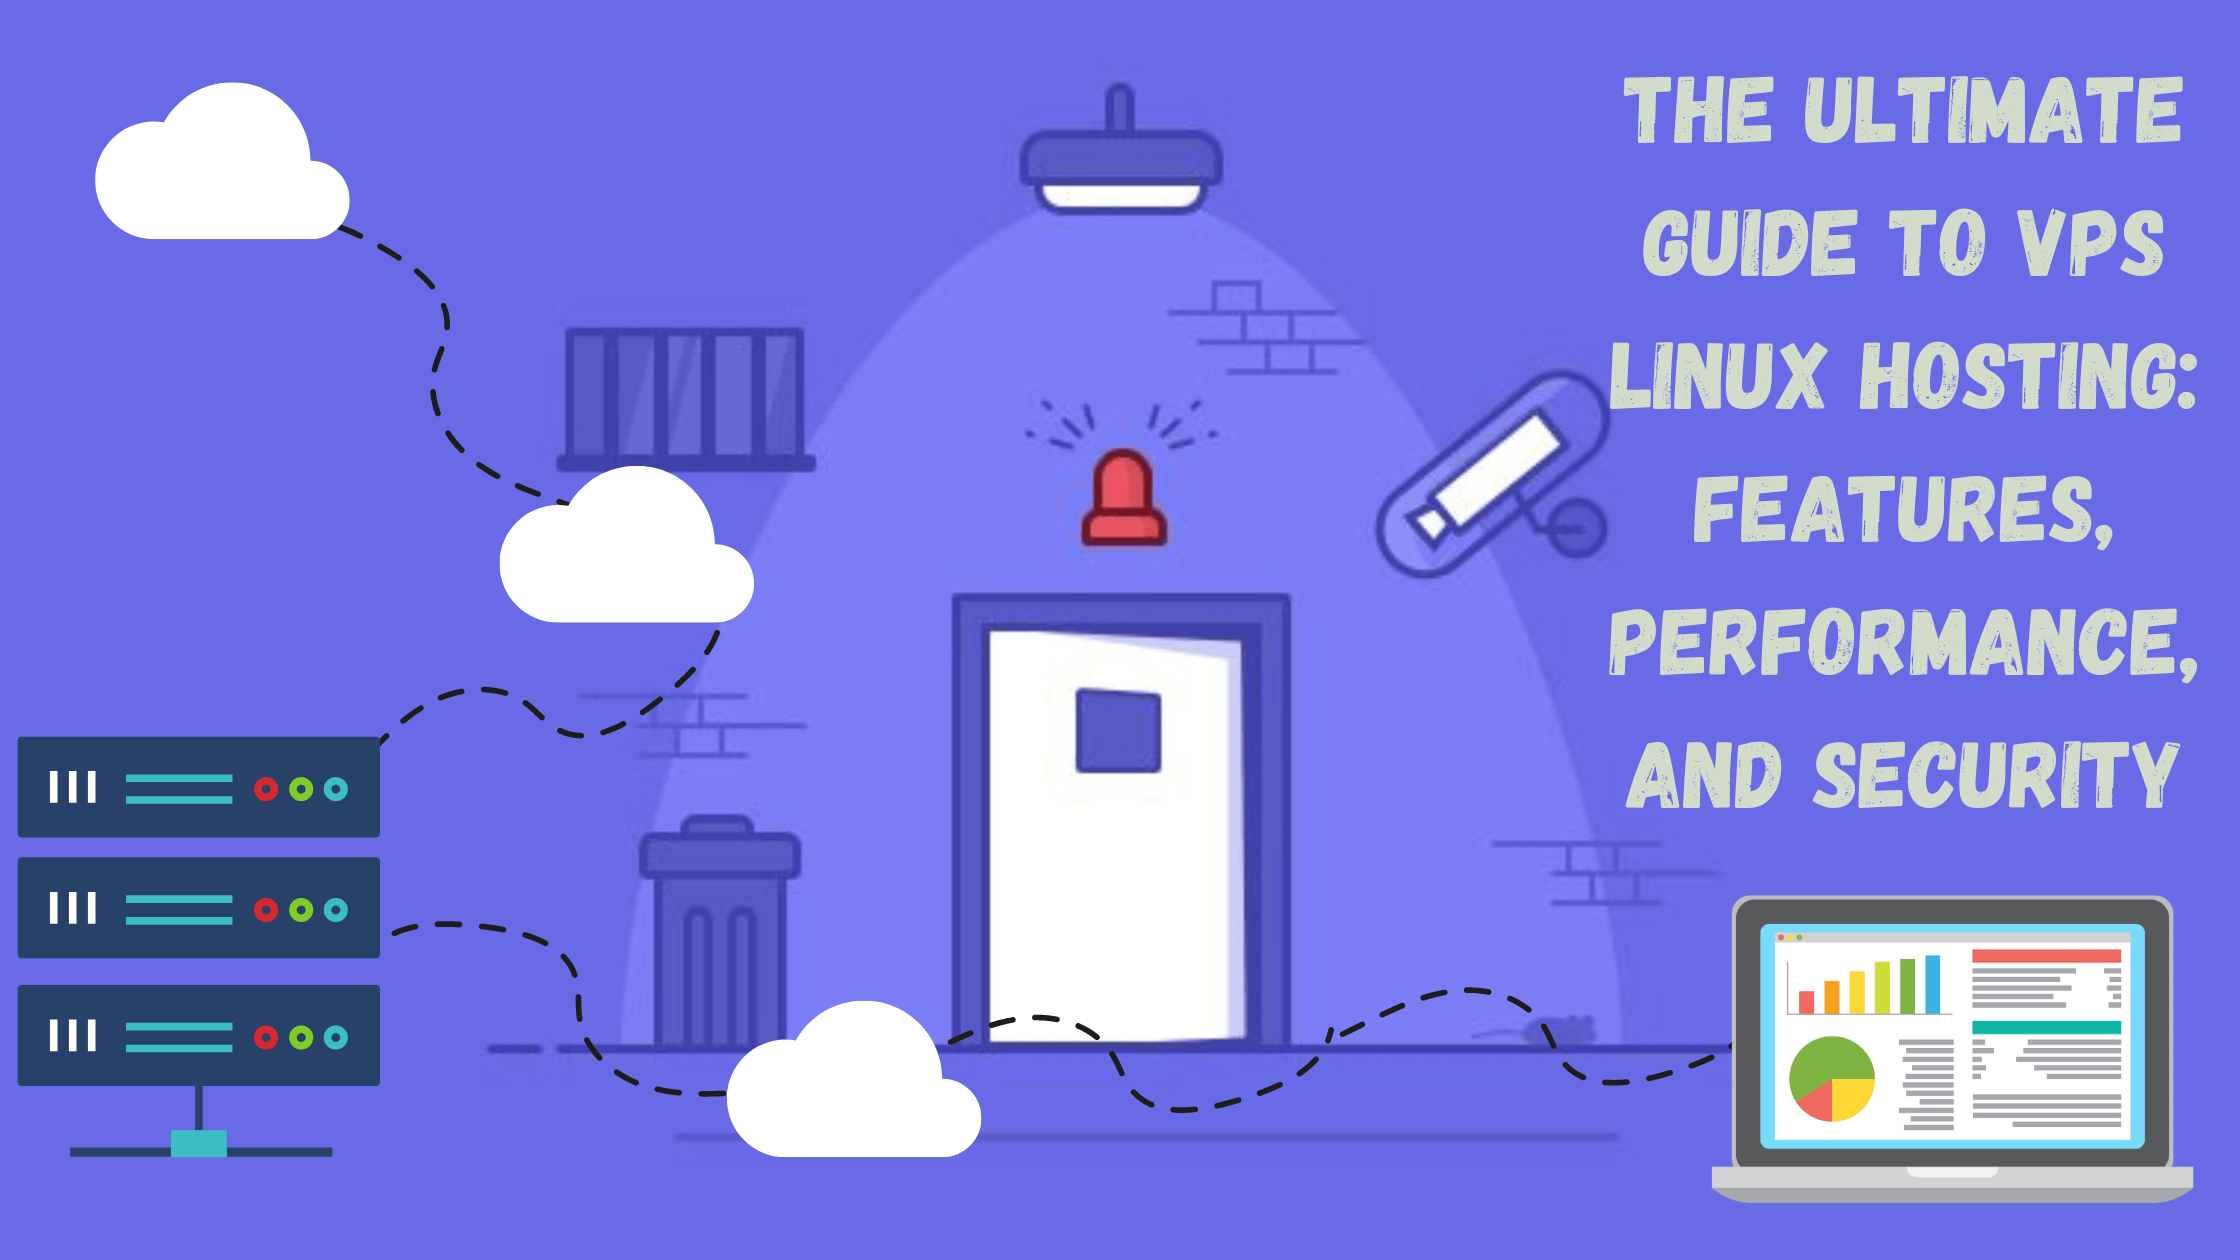 The Ultimate Guide to VPS Linux Hosting: Features, Performance, and Security